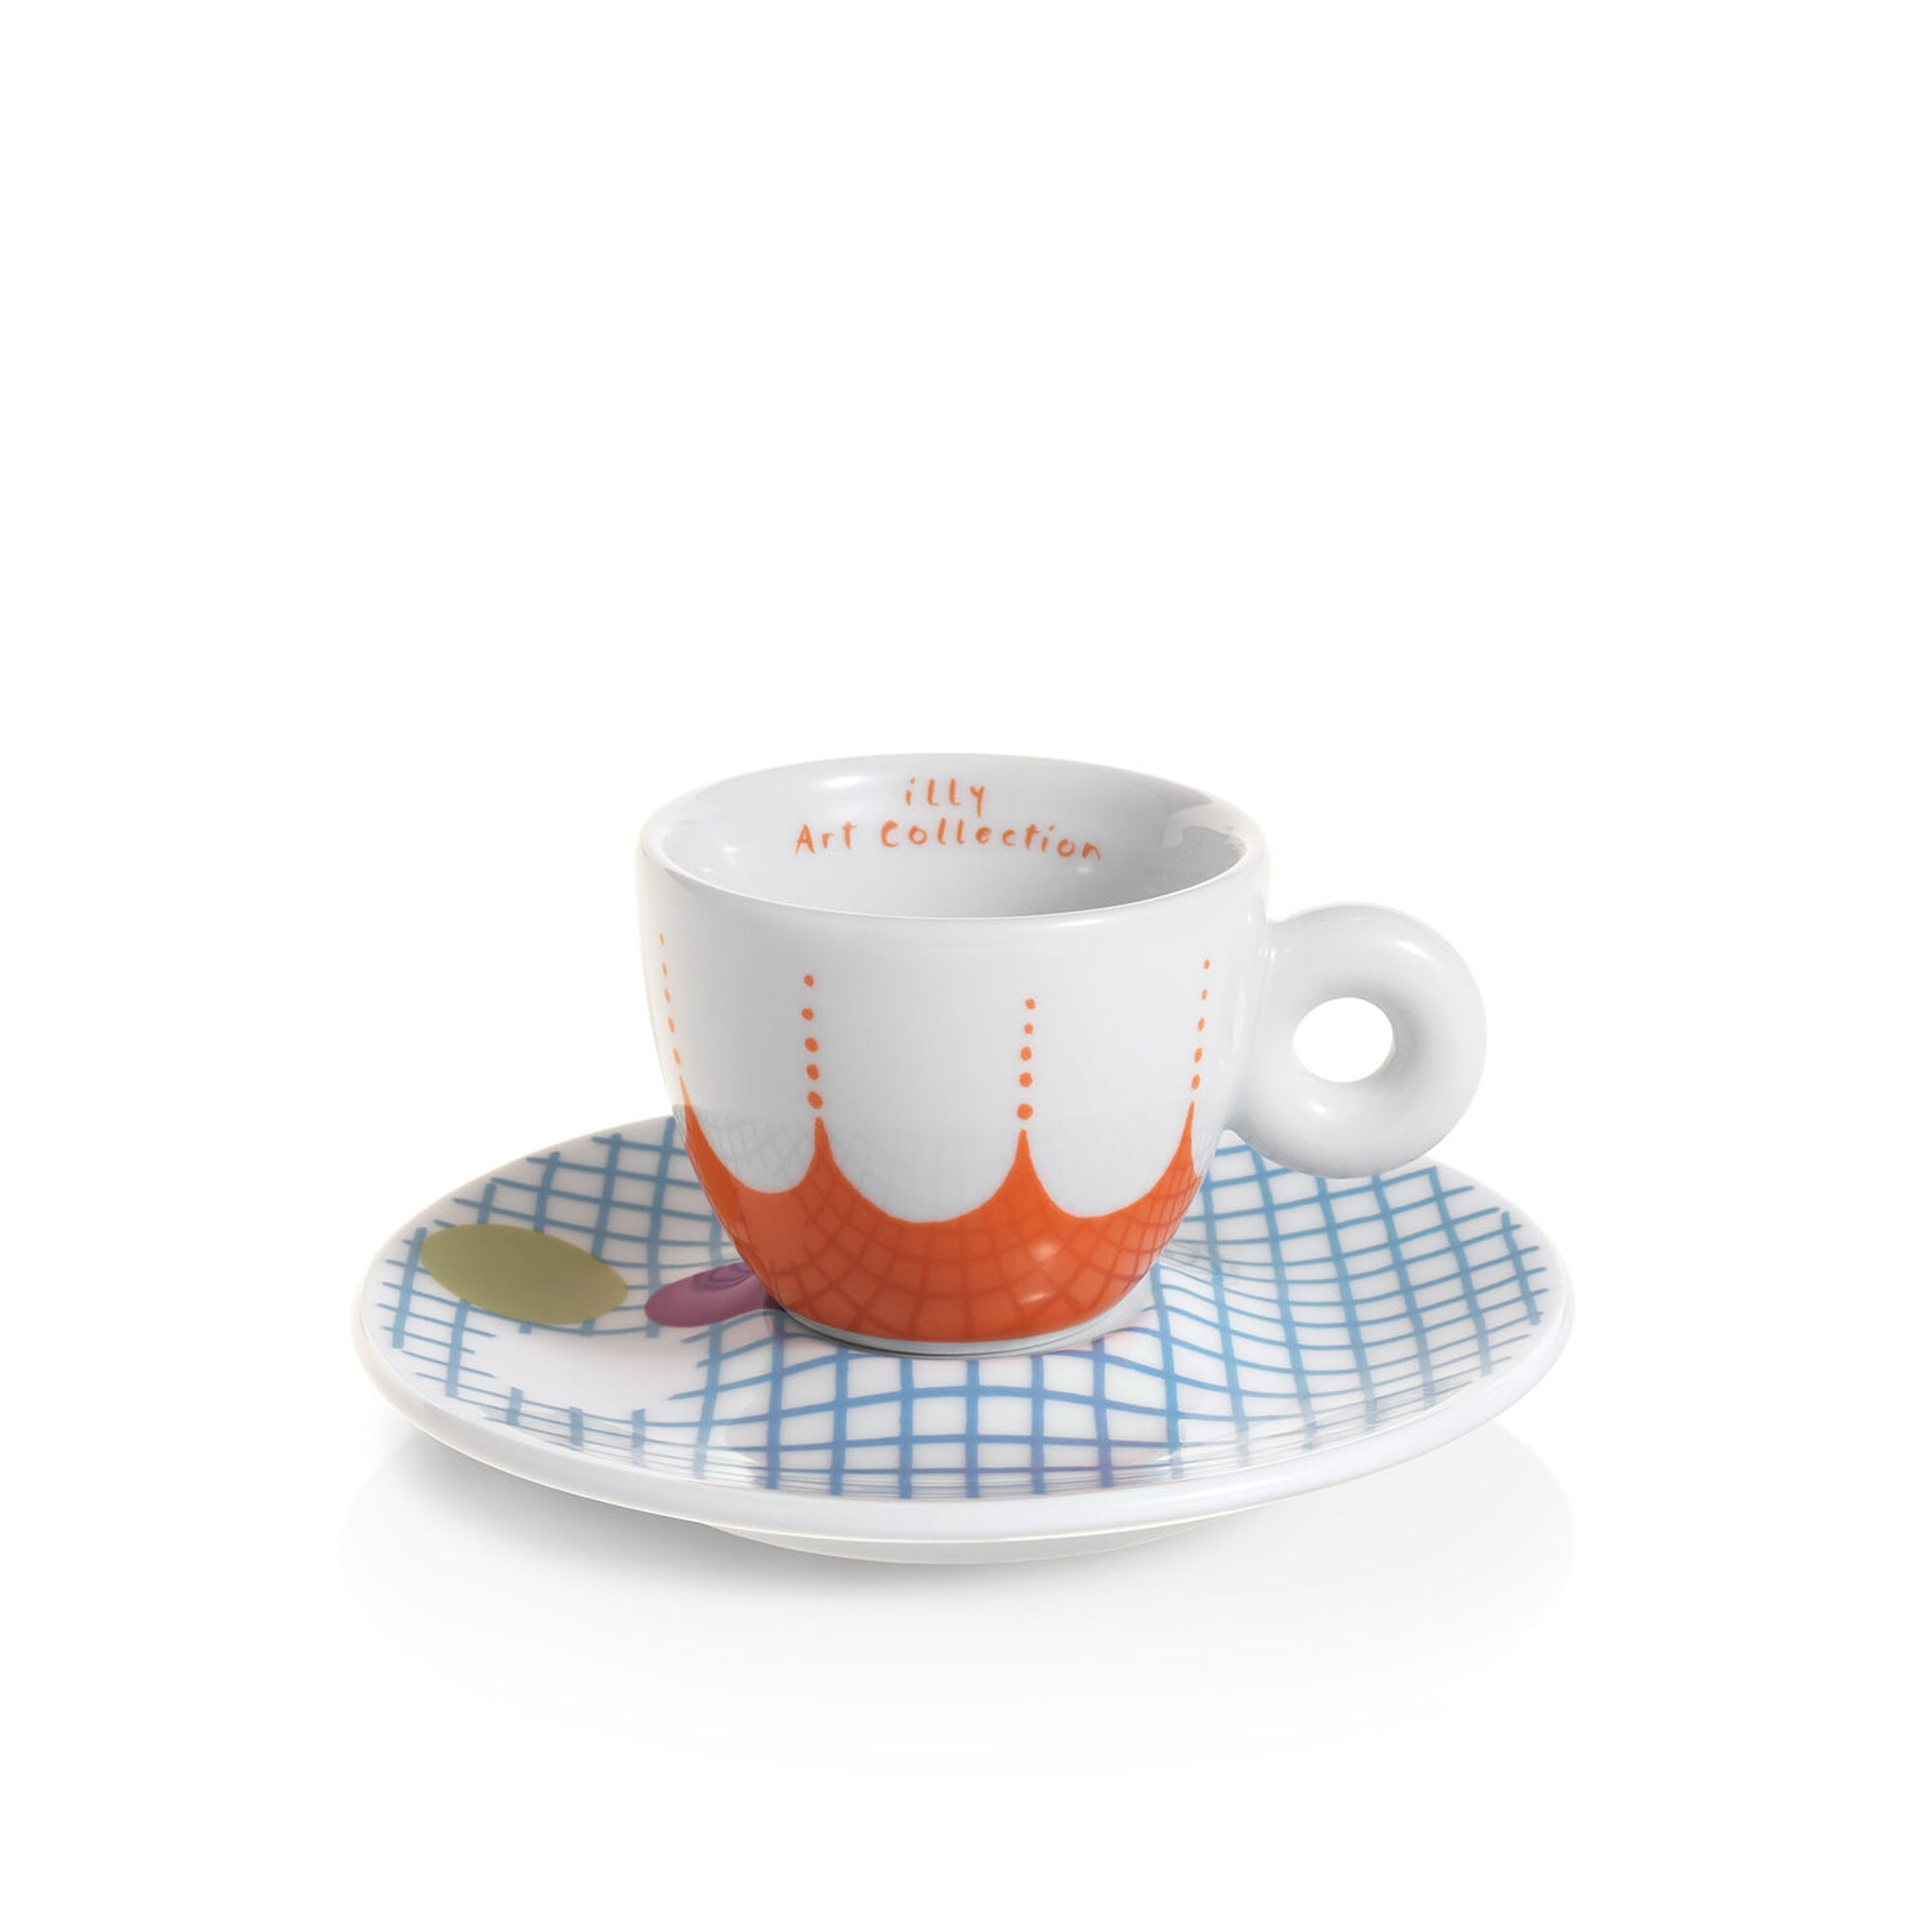 illy 2 Oz Espresso Cup & Saucer Sets, 4 Total